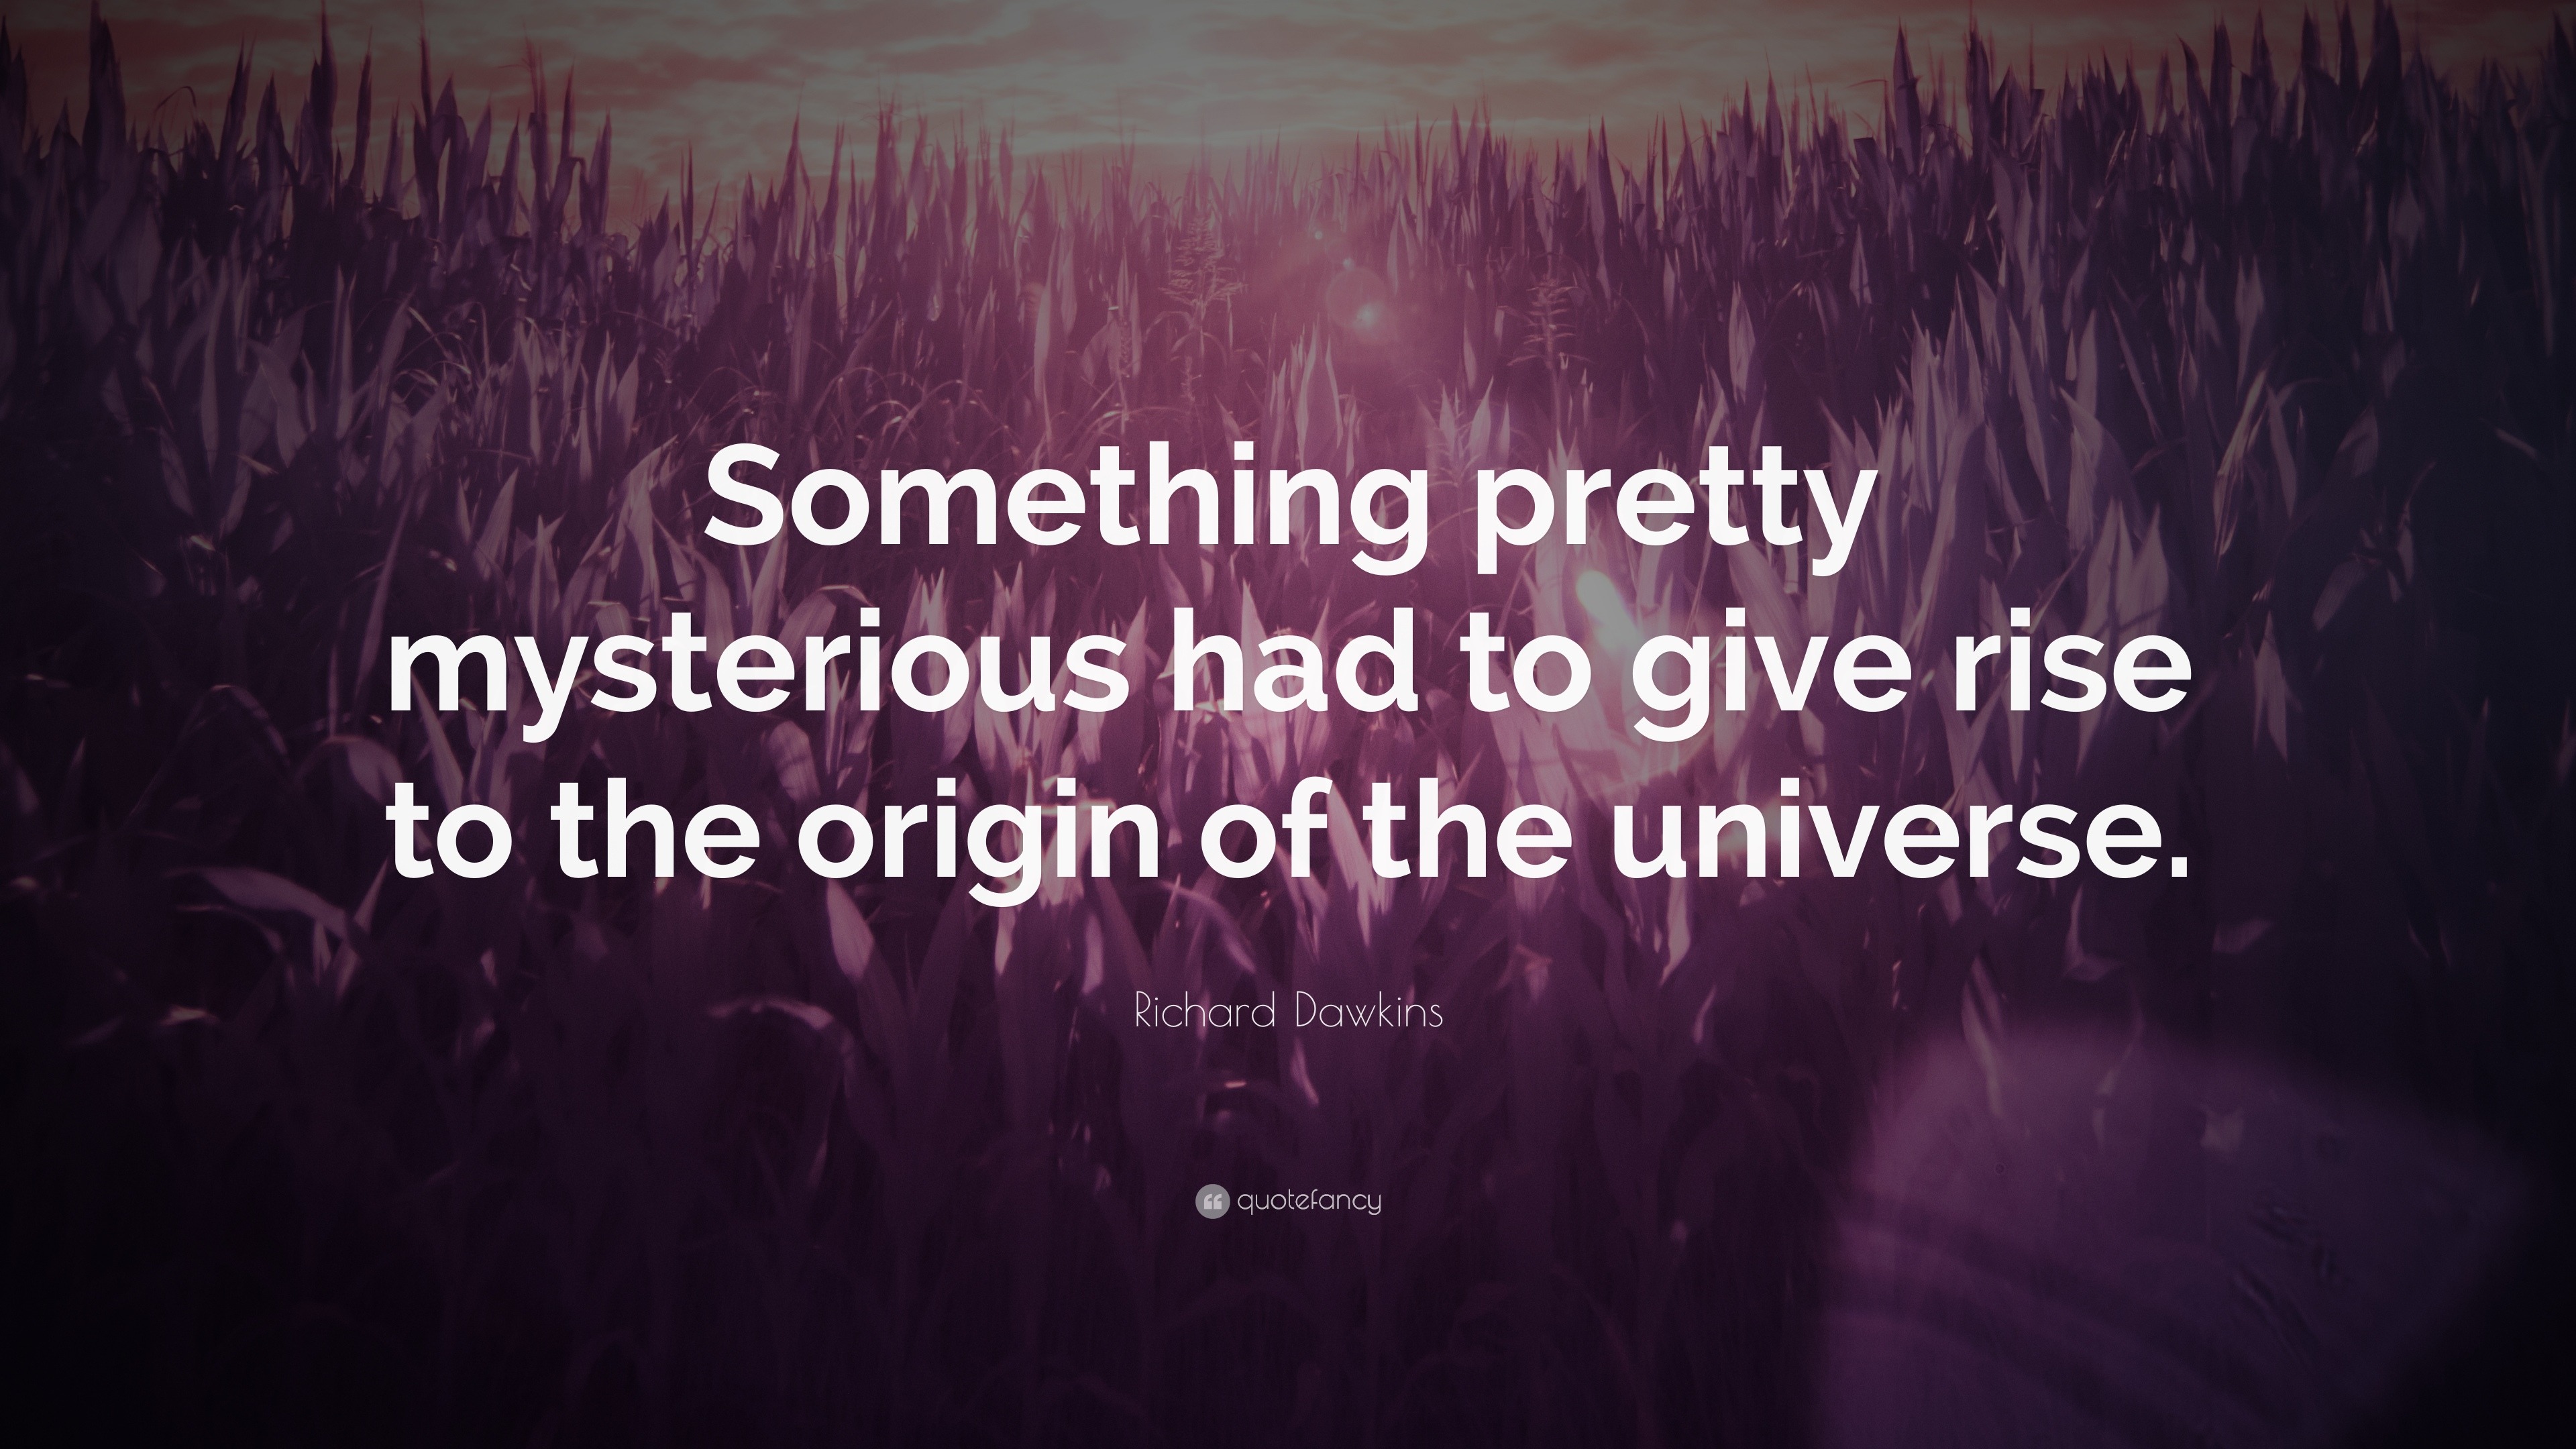 Richard Dawkins Quote: “Something pretty mysterious had to give rise to ...